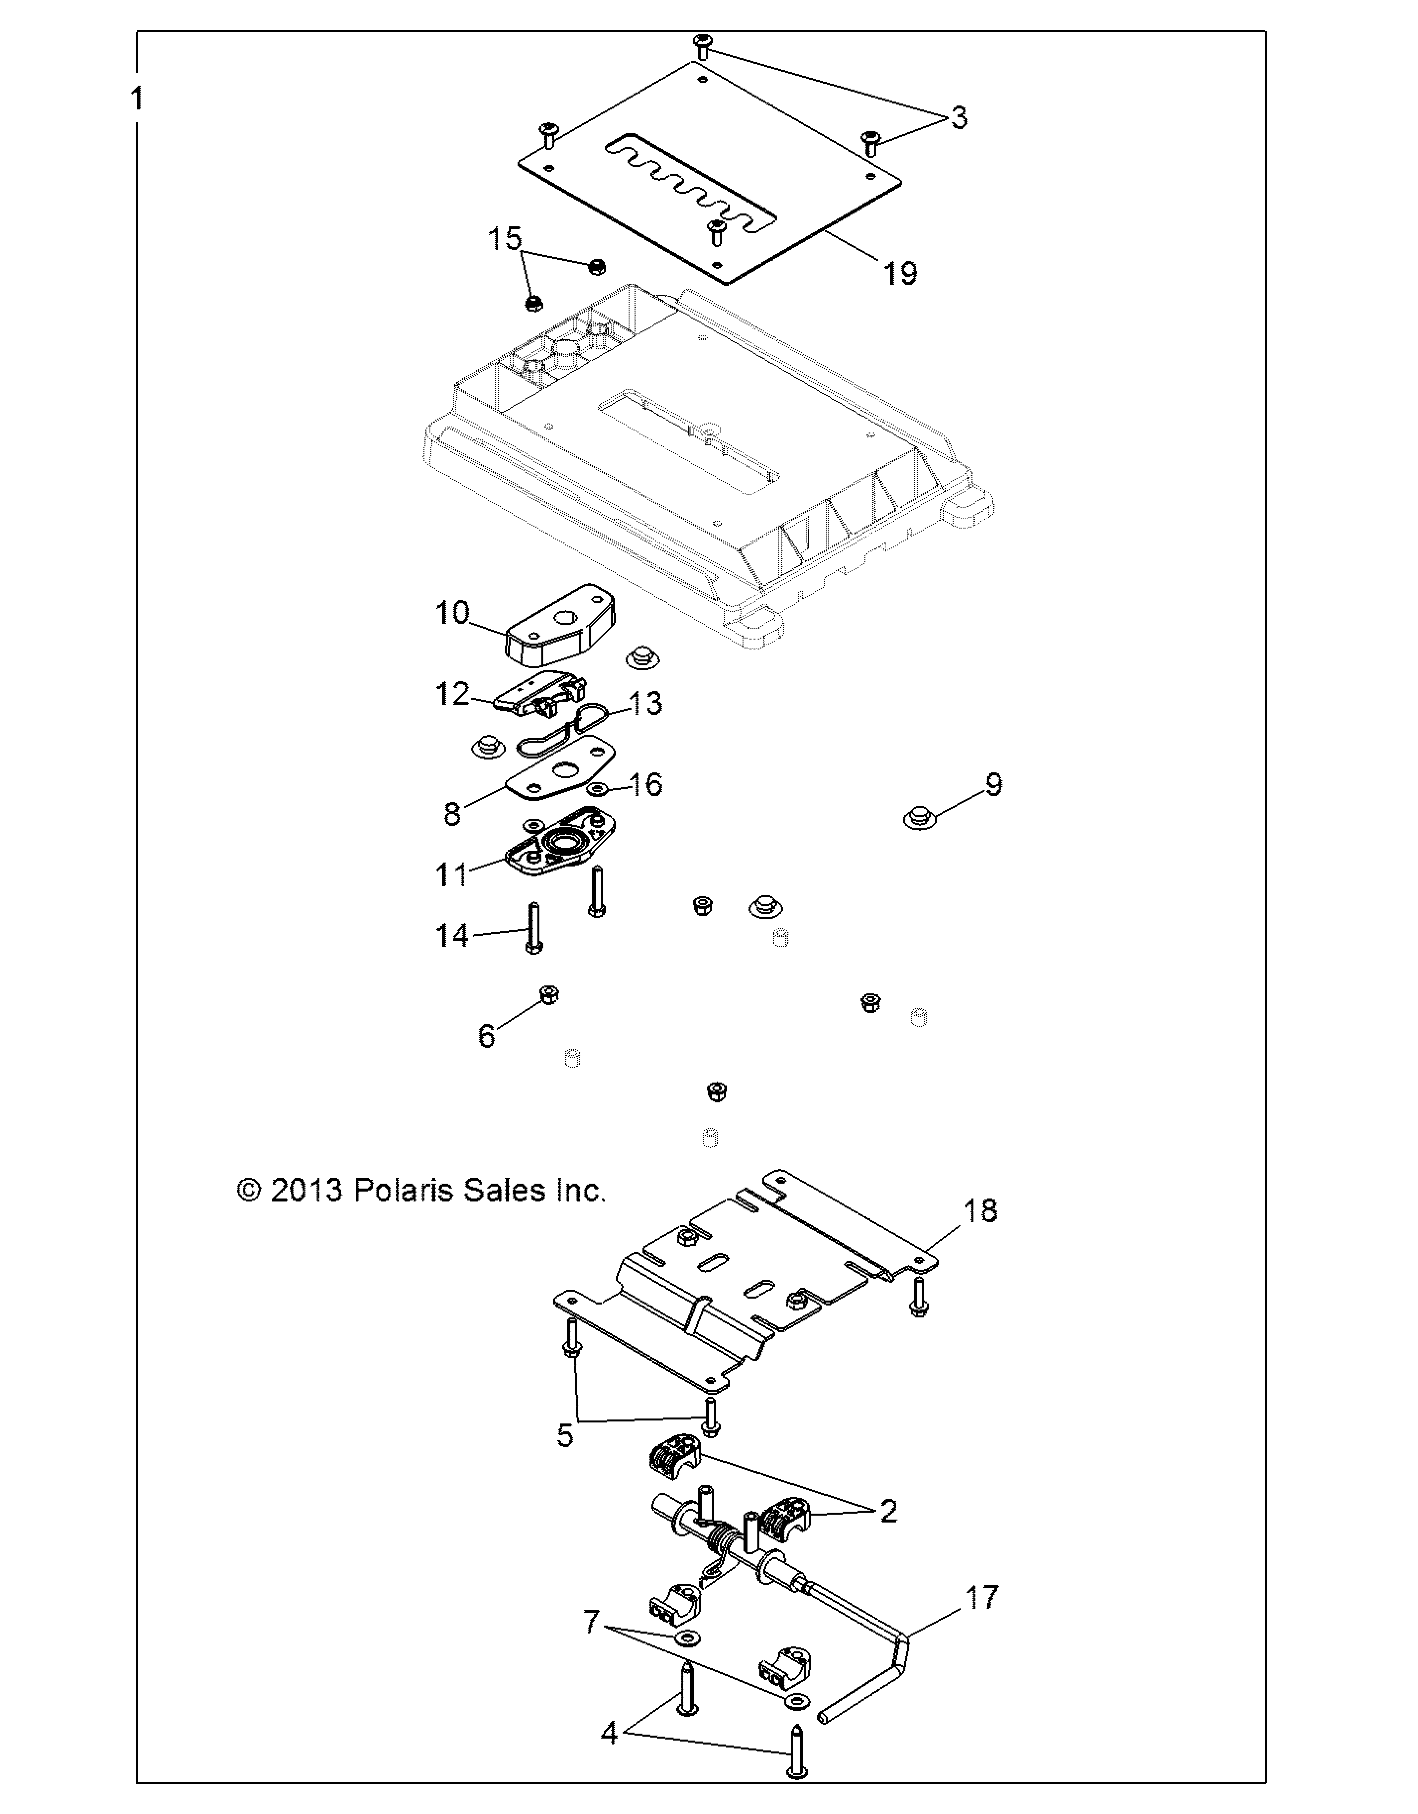 Part Number : 5257916 PLATE-SEAT ADJ TOP